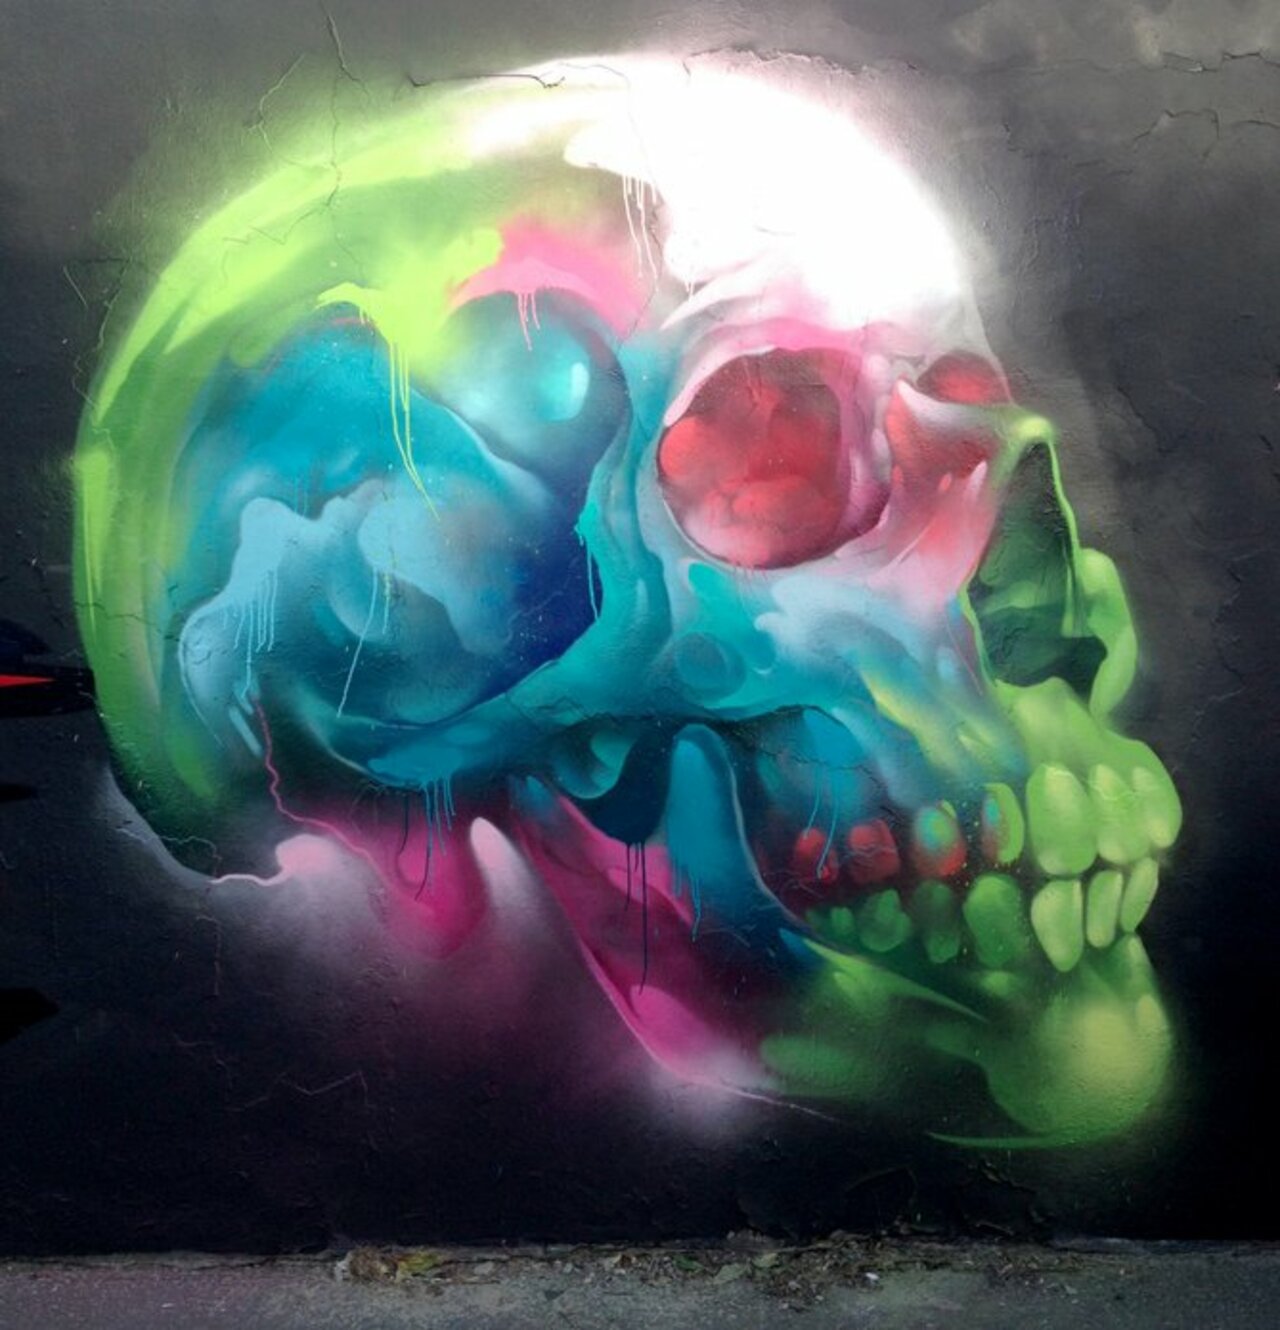 A Day-Glo skull from R.mer (http://globalstreetart.com/rmer) - just because! -- Piece painted in the #UK. -- #globalstreetart #streetart #art #graffiti https://t.co/nhvkZKTF9i